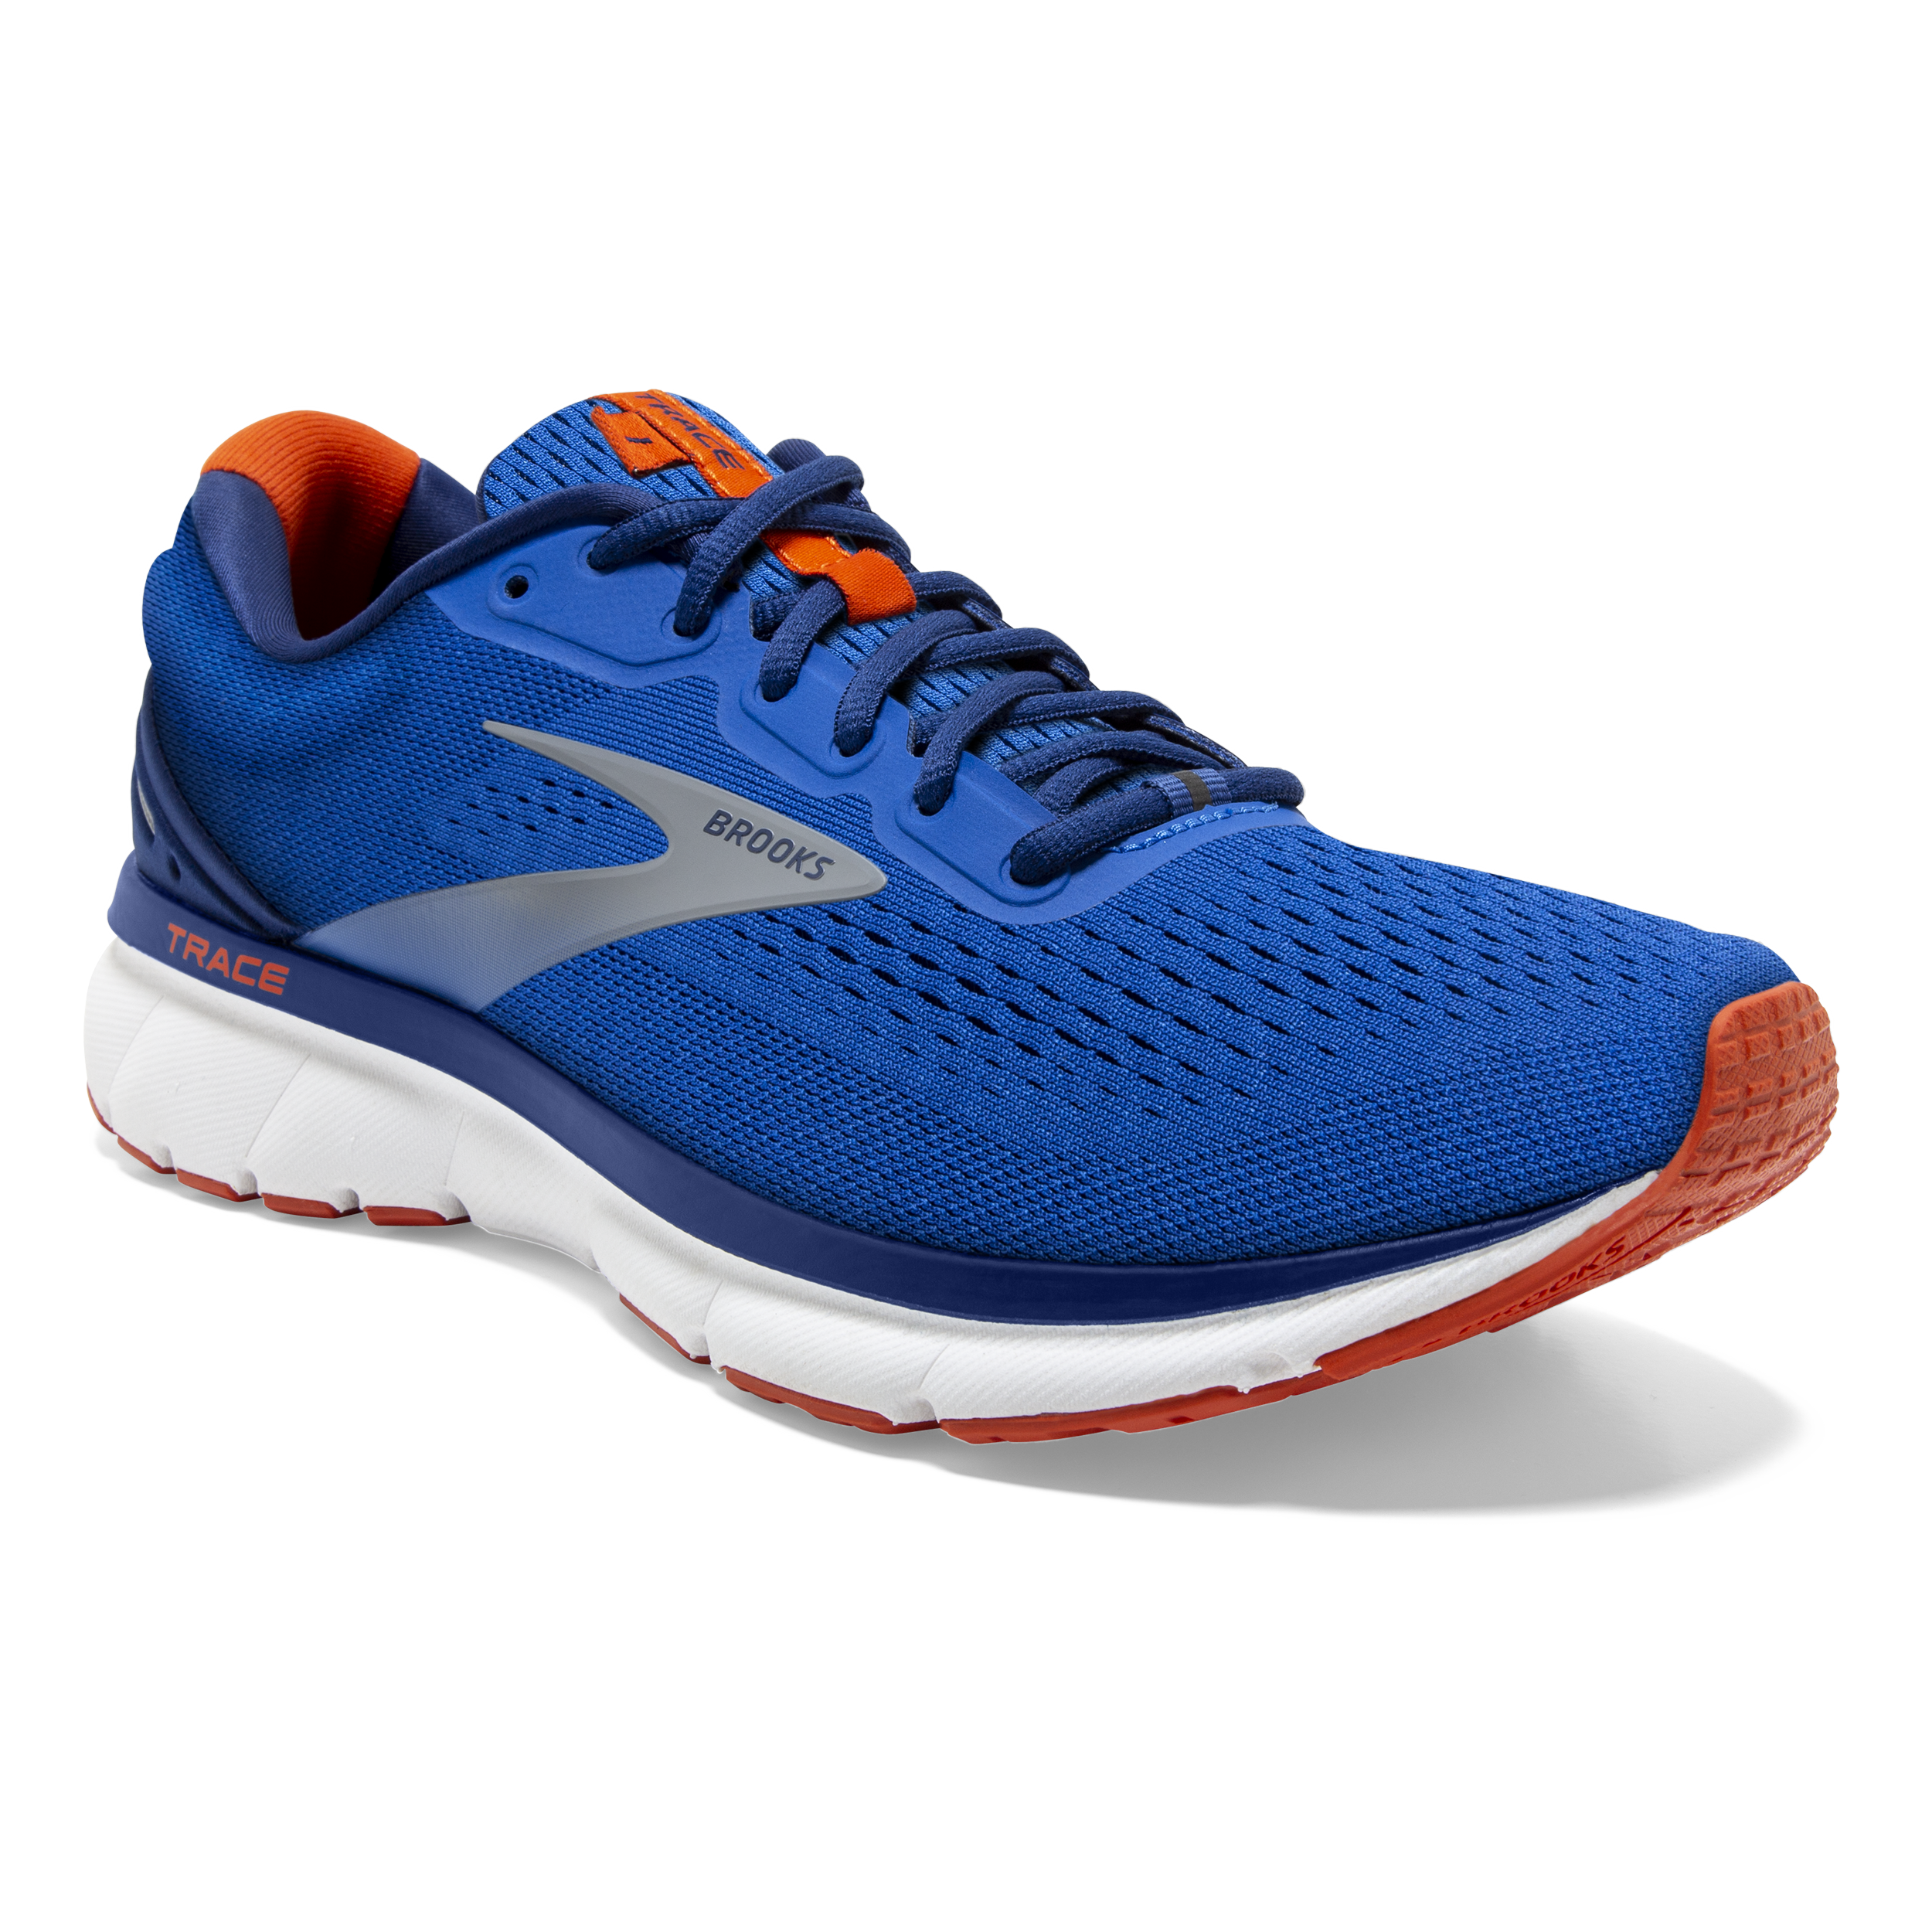 Trace : Chaussures de Running adaptatives pour homme | Brooks Running